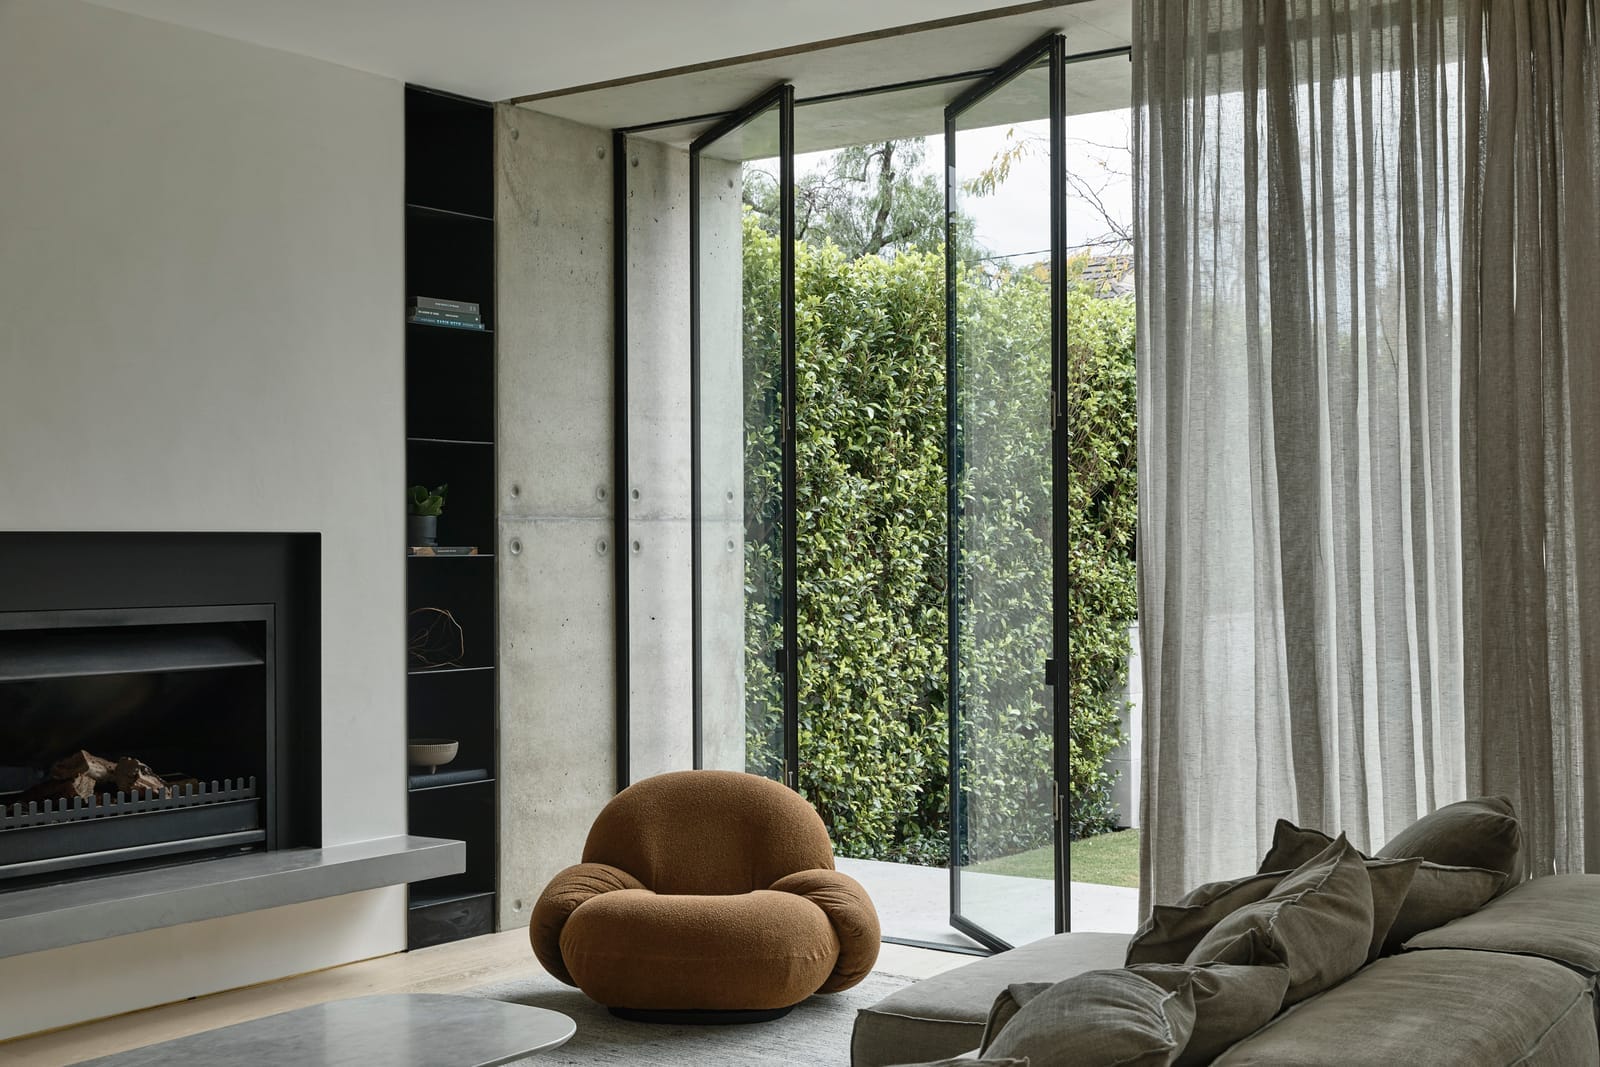 RE Residence by Inglis Architects cozy corner of a modern living room with large glass sliding doors that open to an outdoor area with greenery. Sheer curtains filter the natural light, enhancing the tranquil atmosphere. A contemporary, round, brown chair sits in the foreground, and a plush, grey sofa adorned with cushions is partially visible. A minimalist fireplace anchors the space to the left, adding warmth to the setting.